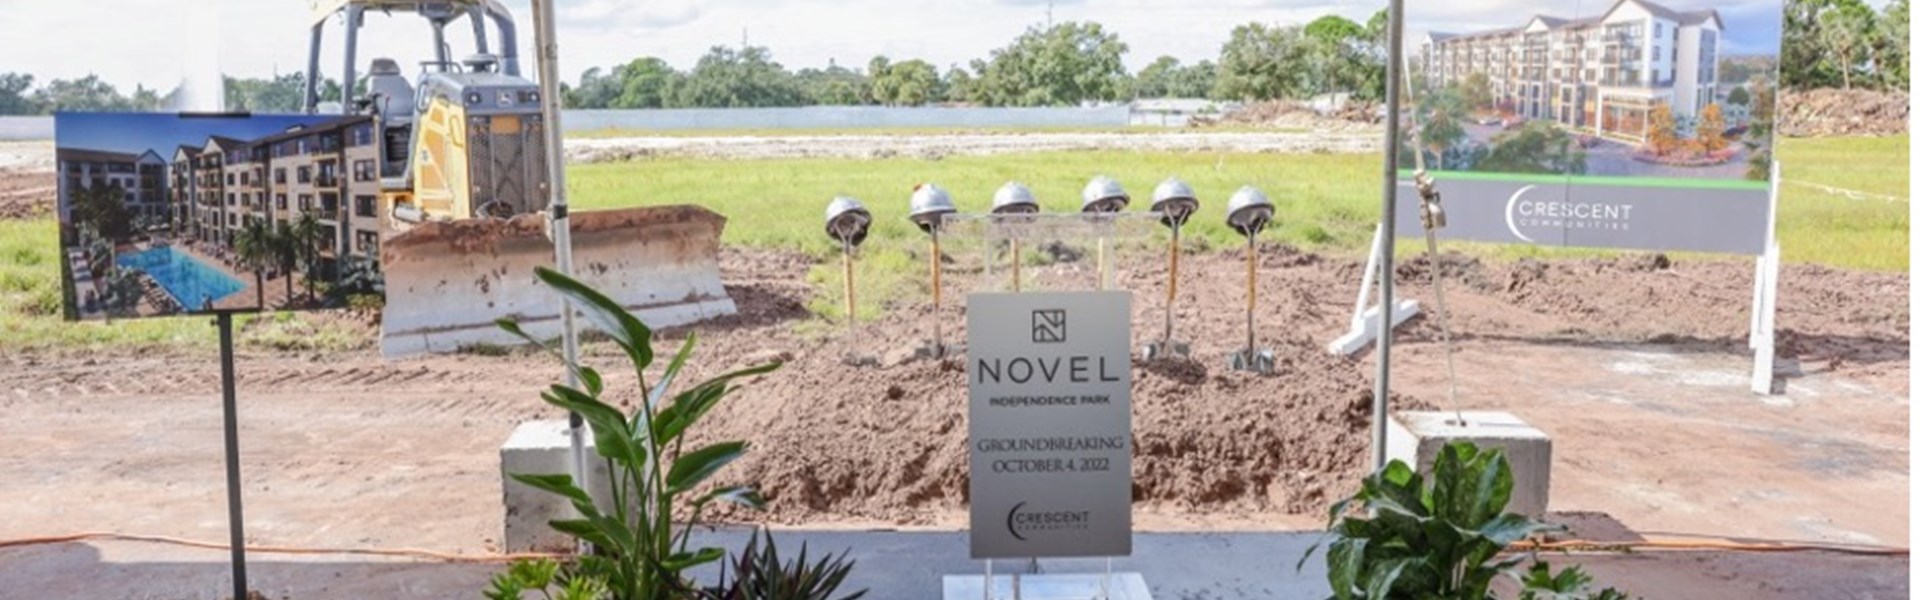 Crescent Communities Breaks Ground on New Multifamily Community in Tampa